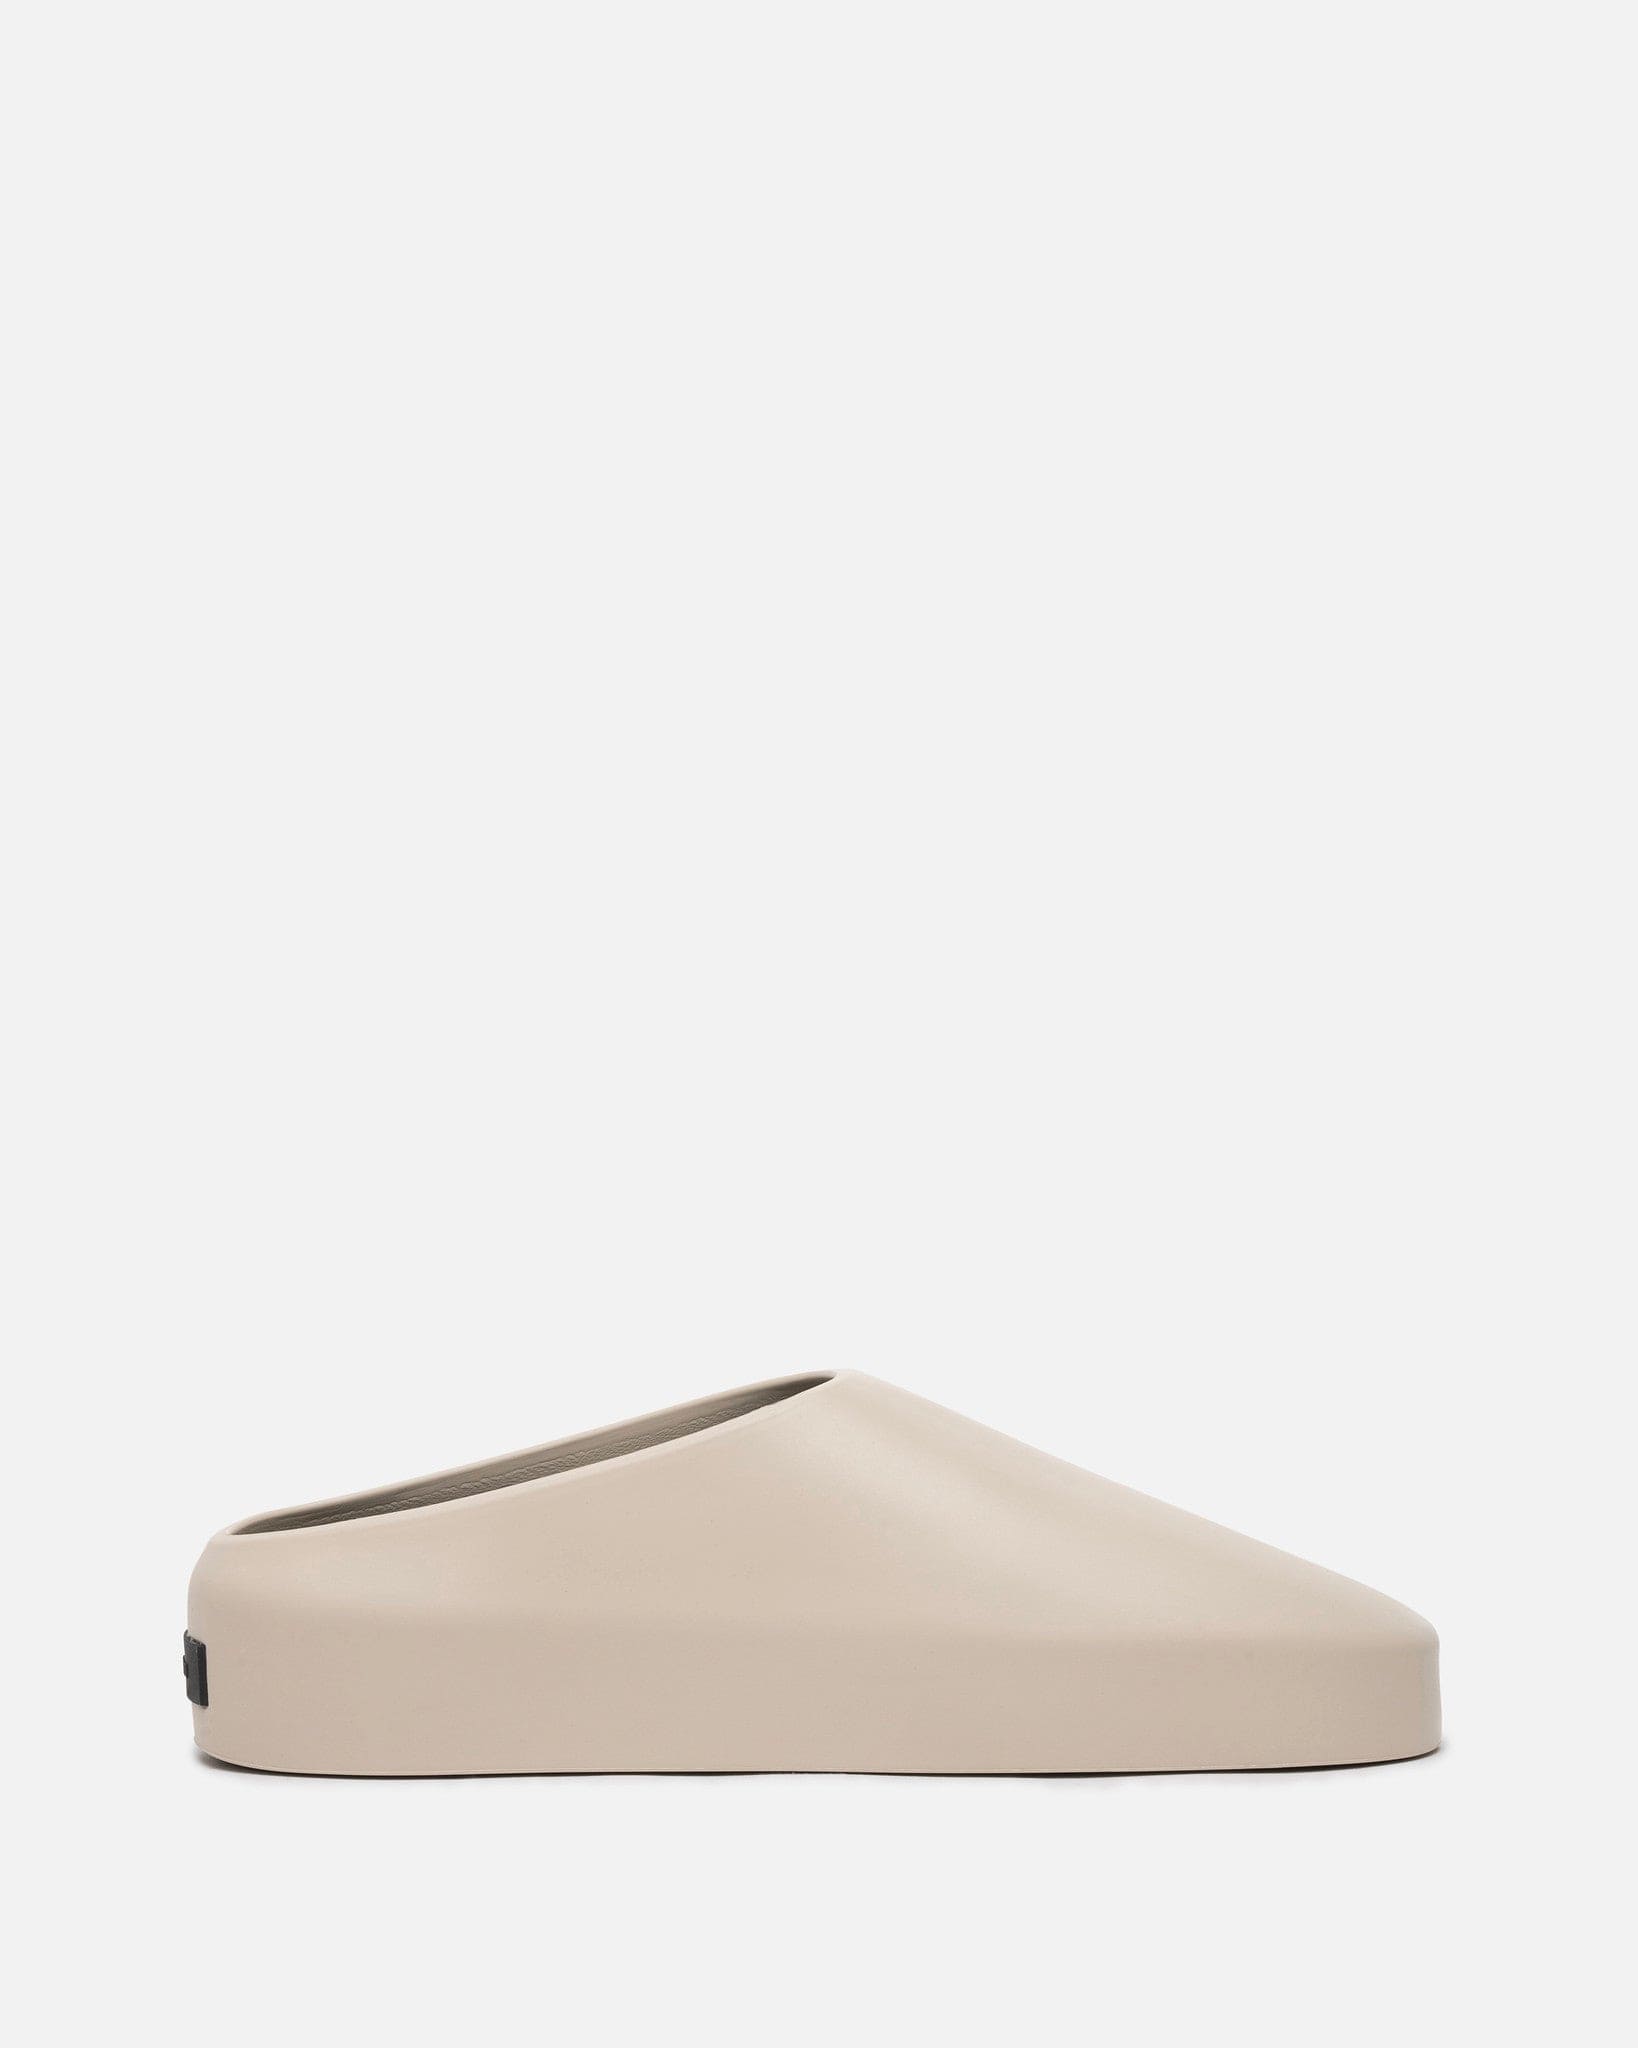 Fear of God Men's Sneakers The California 2.0 in Taupe